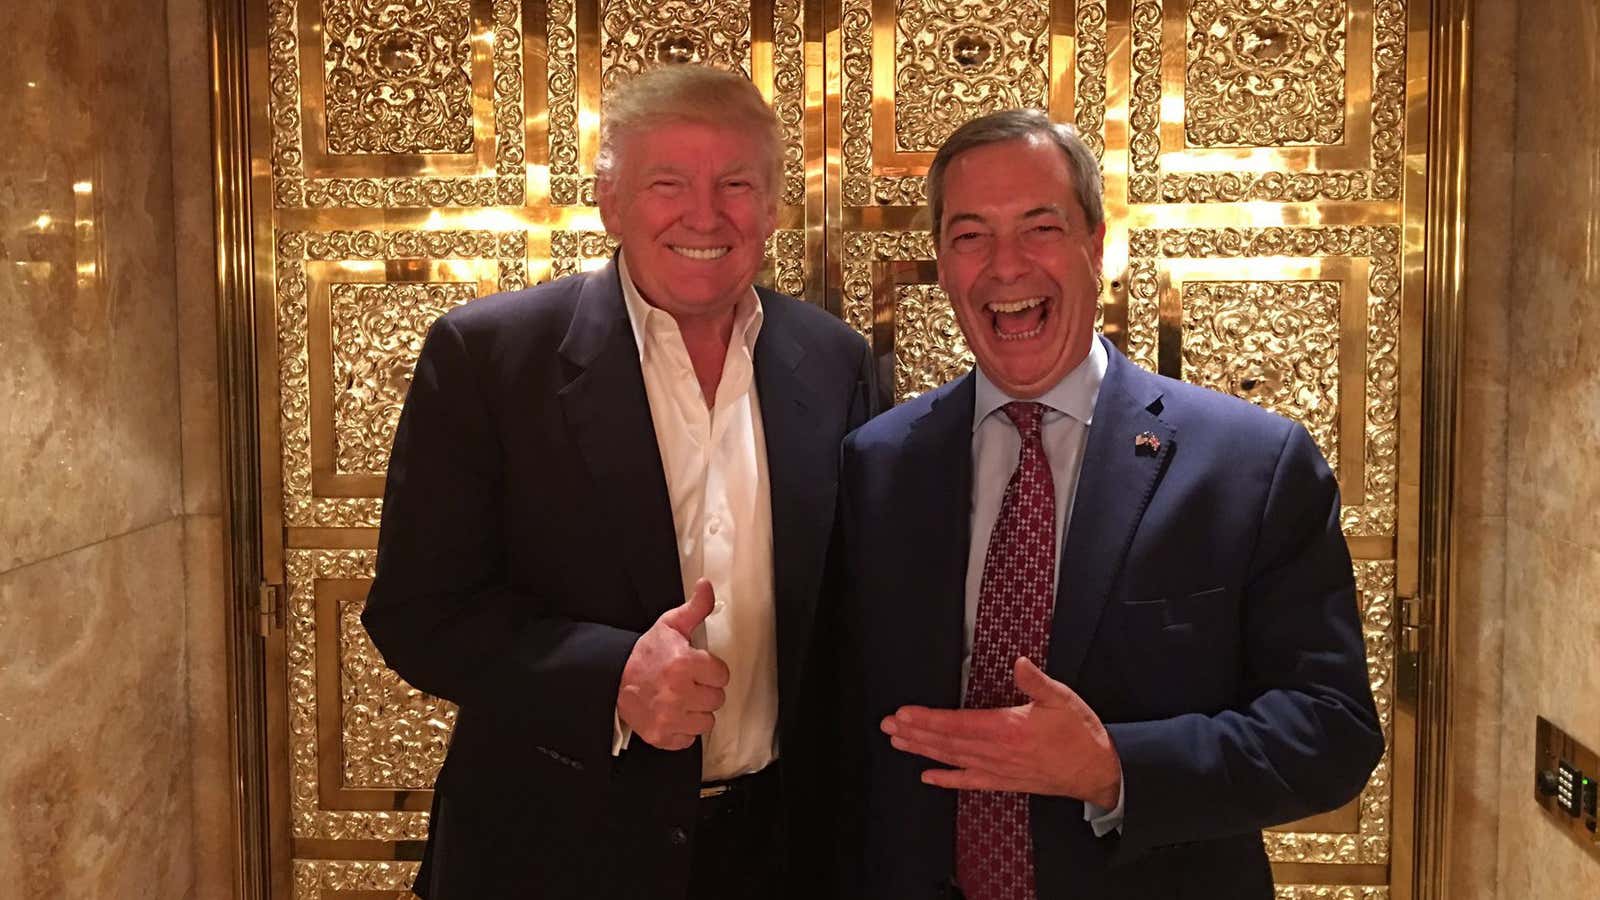 The outsiders. Trump with Britain’s Farage.